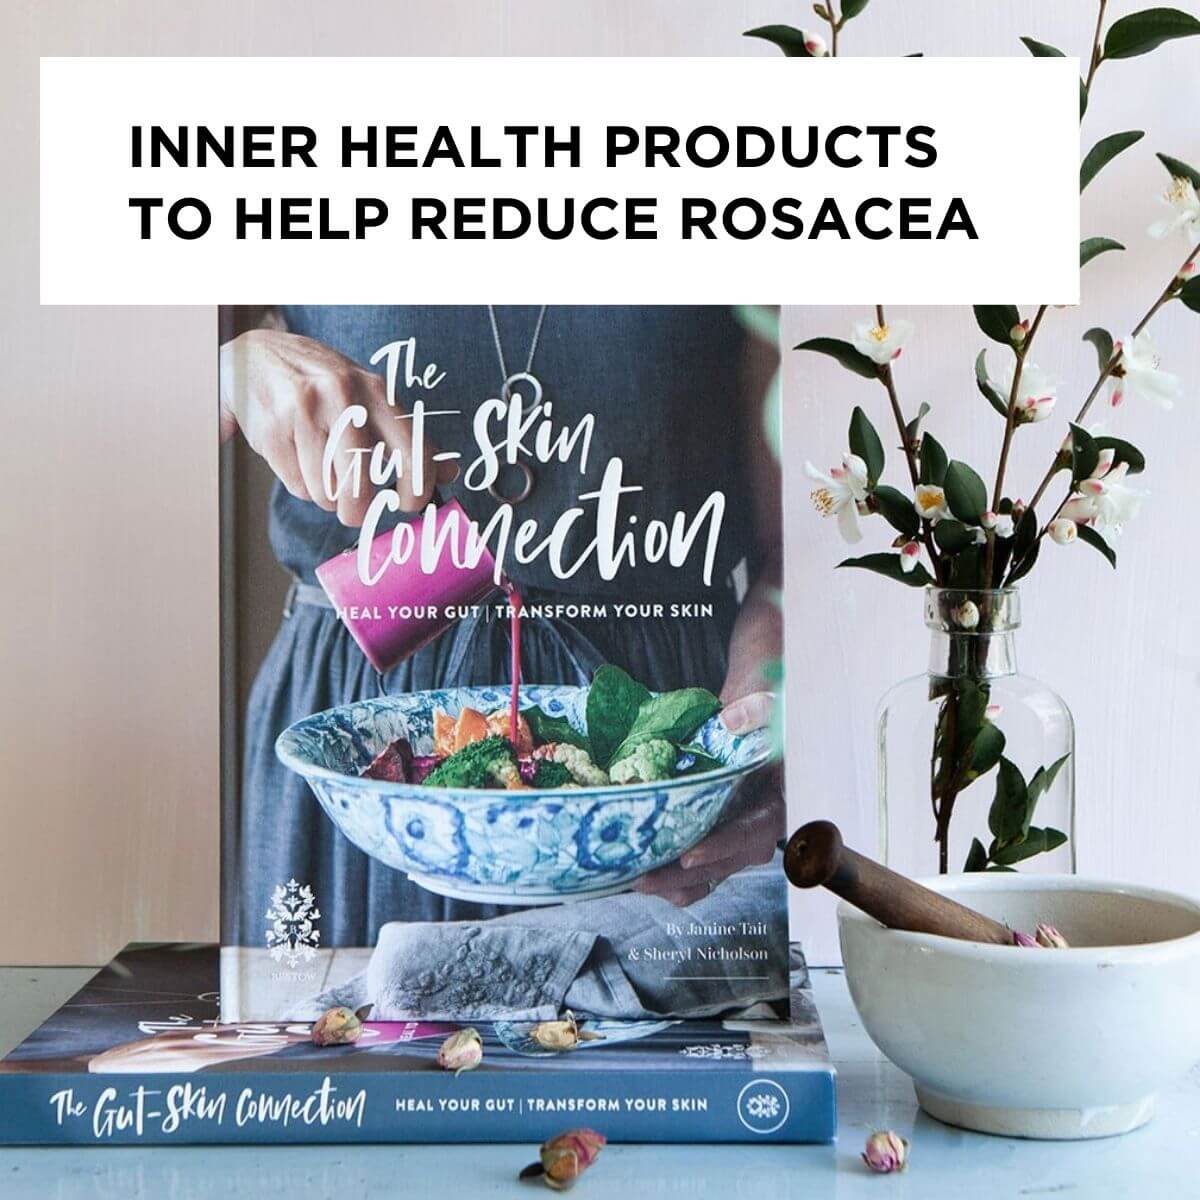 Inner Health Products to Help Reduce Rosacea